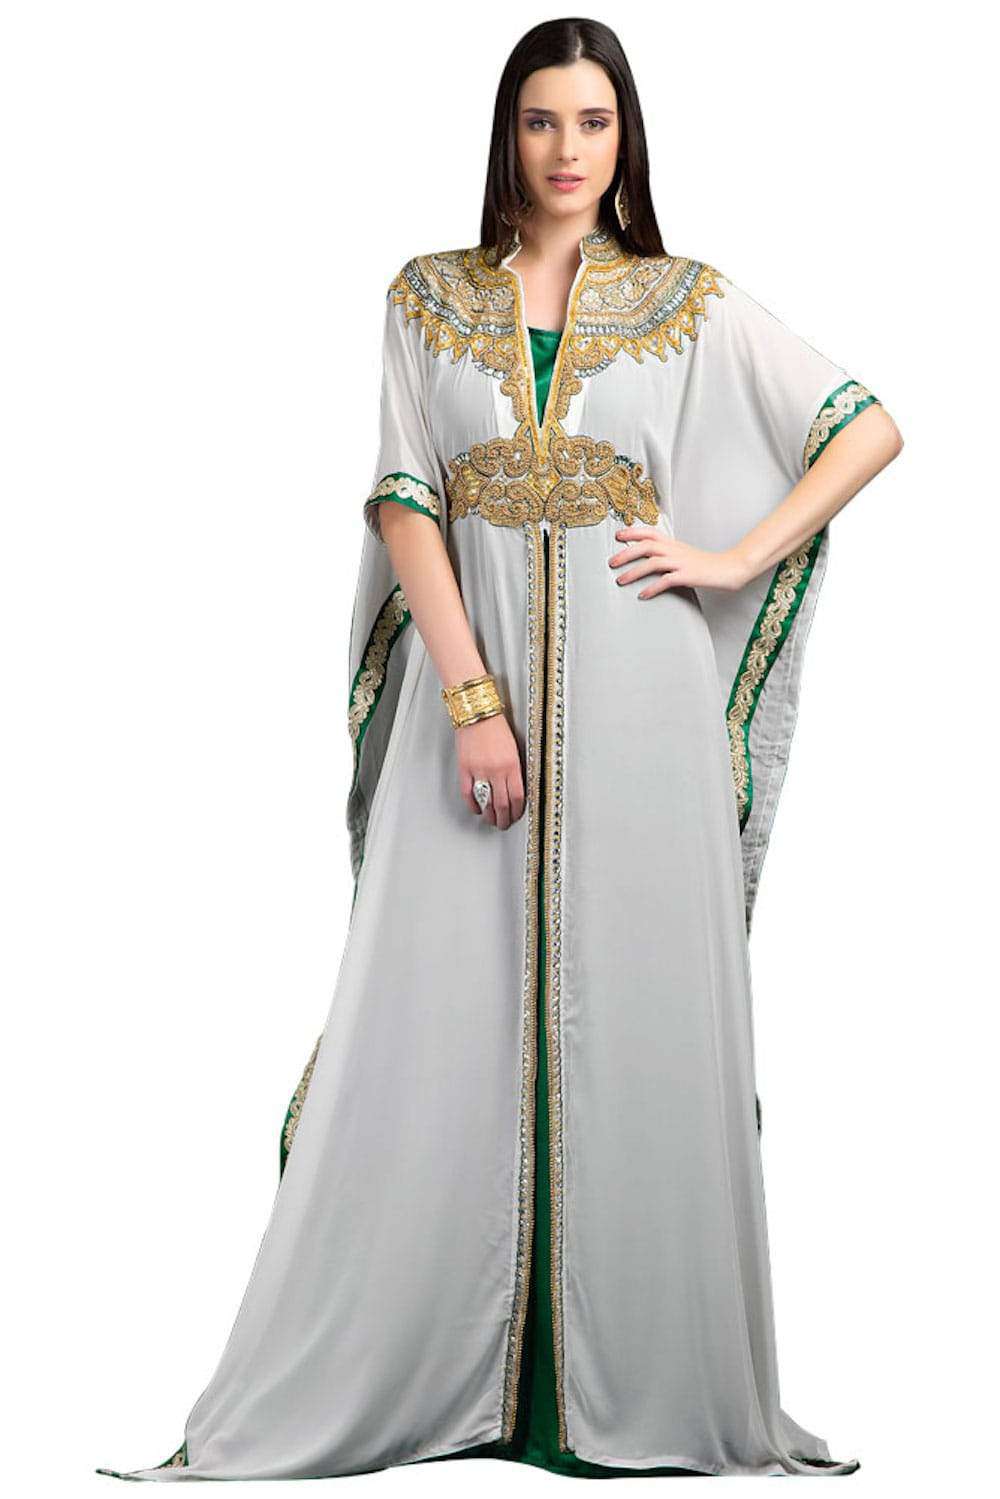 Green & White Color Long Dress With Hand Work